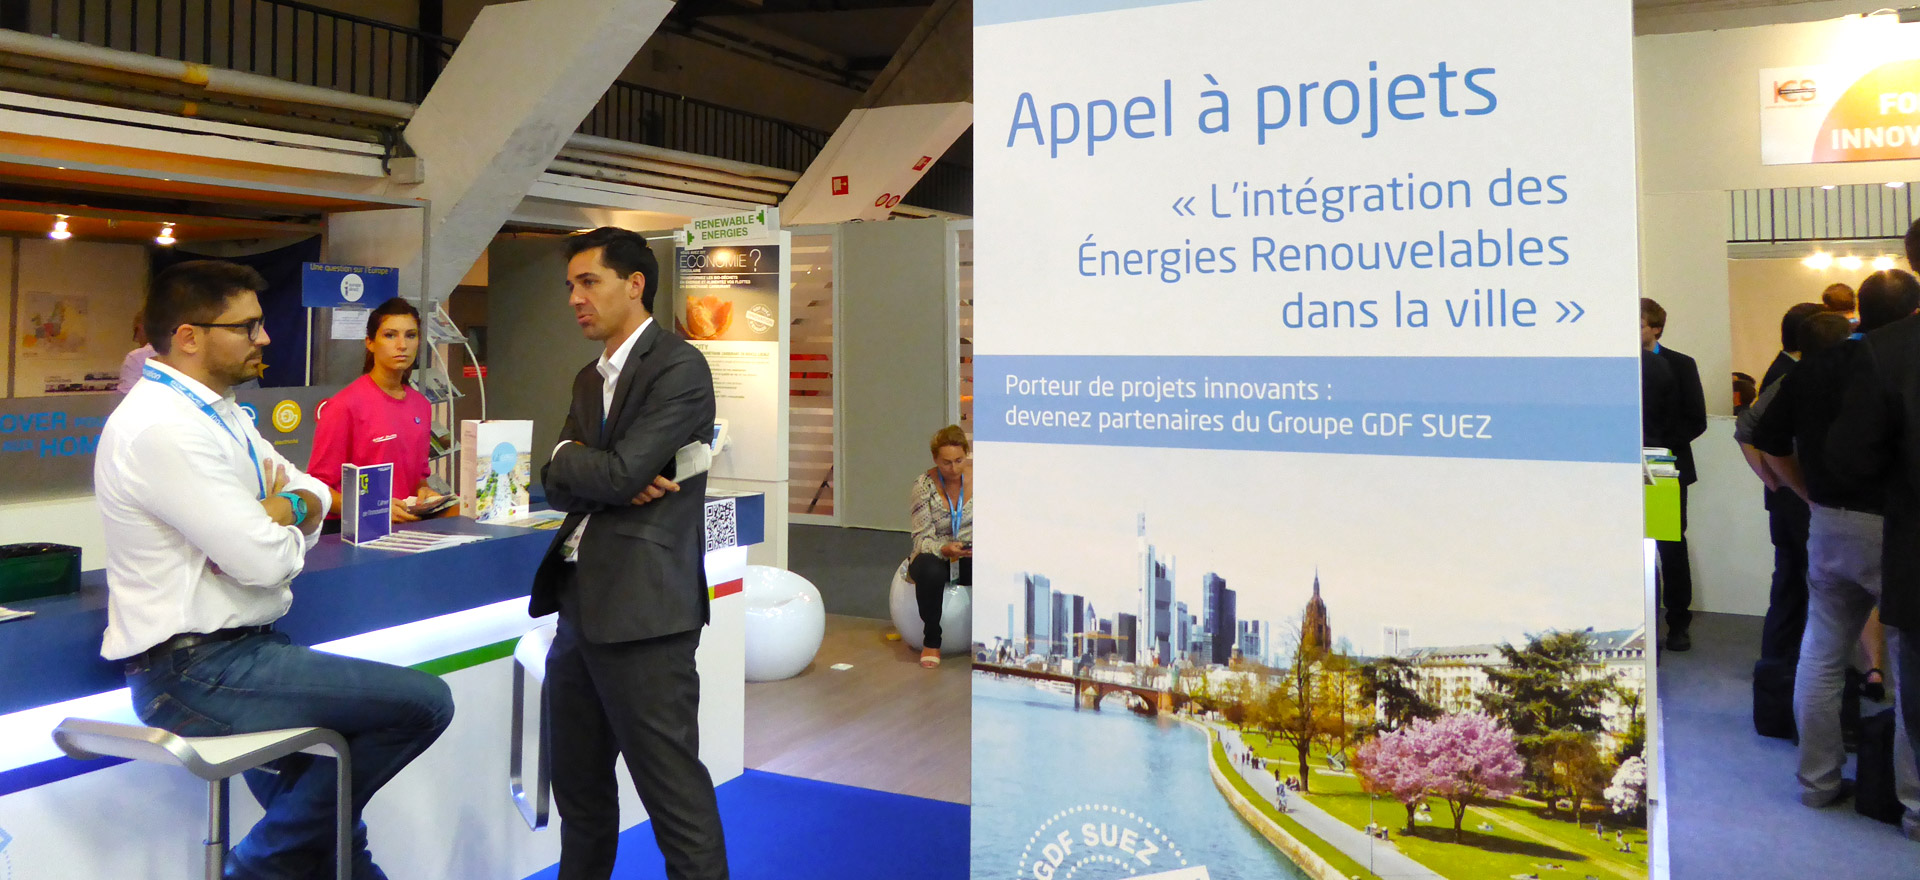 GDF SUEZ’s call for projects, on the theme of sustainable energy, engaged startups